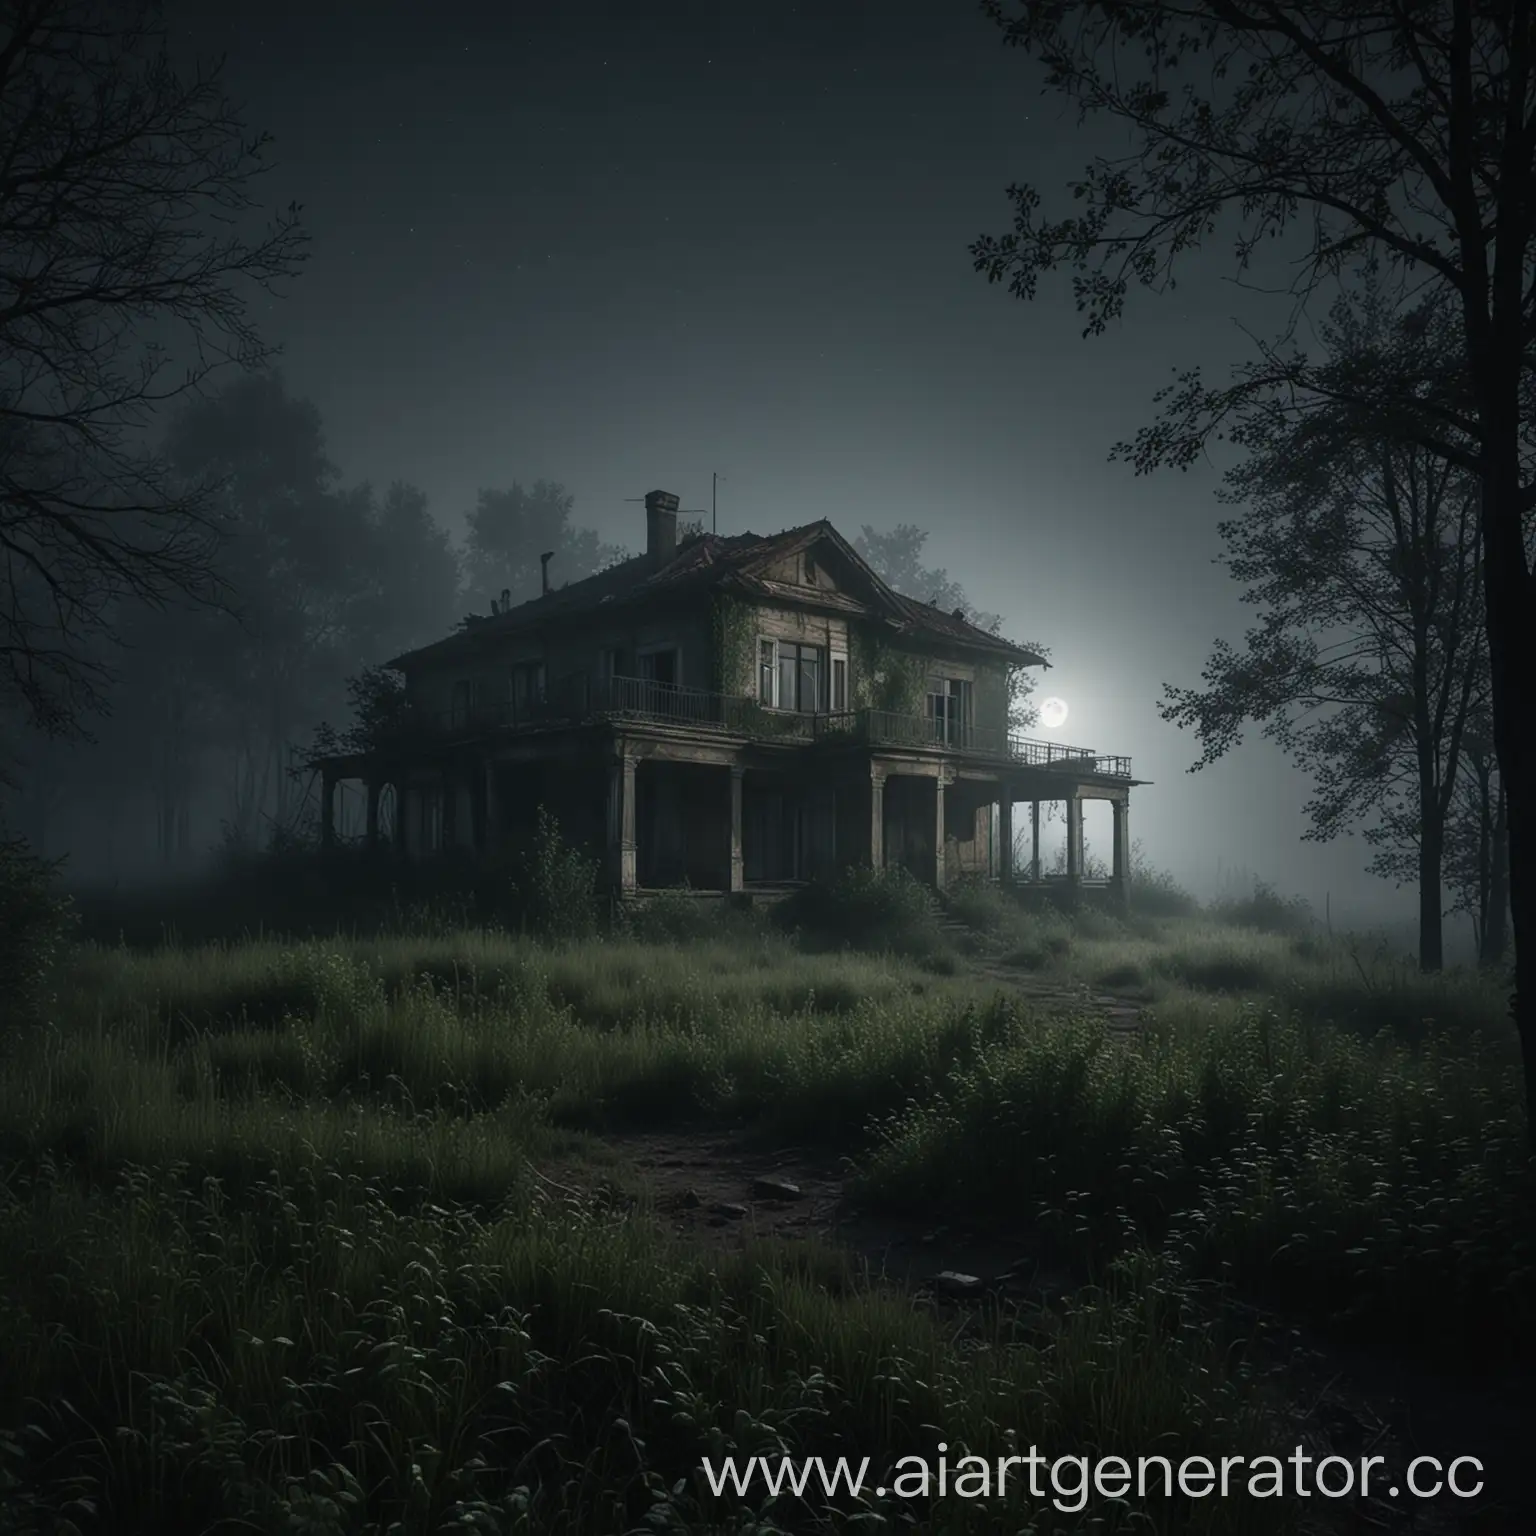 Abandoned-Old-House-in-Moonlit-Forest-at-Night-with-Realistic-Fog